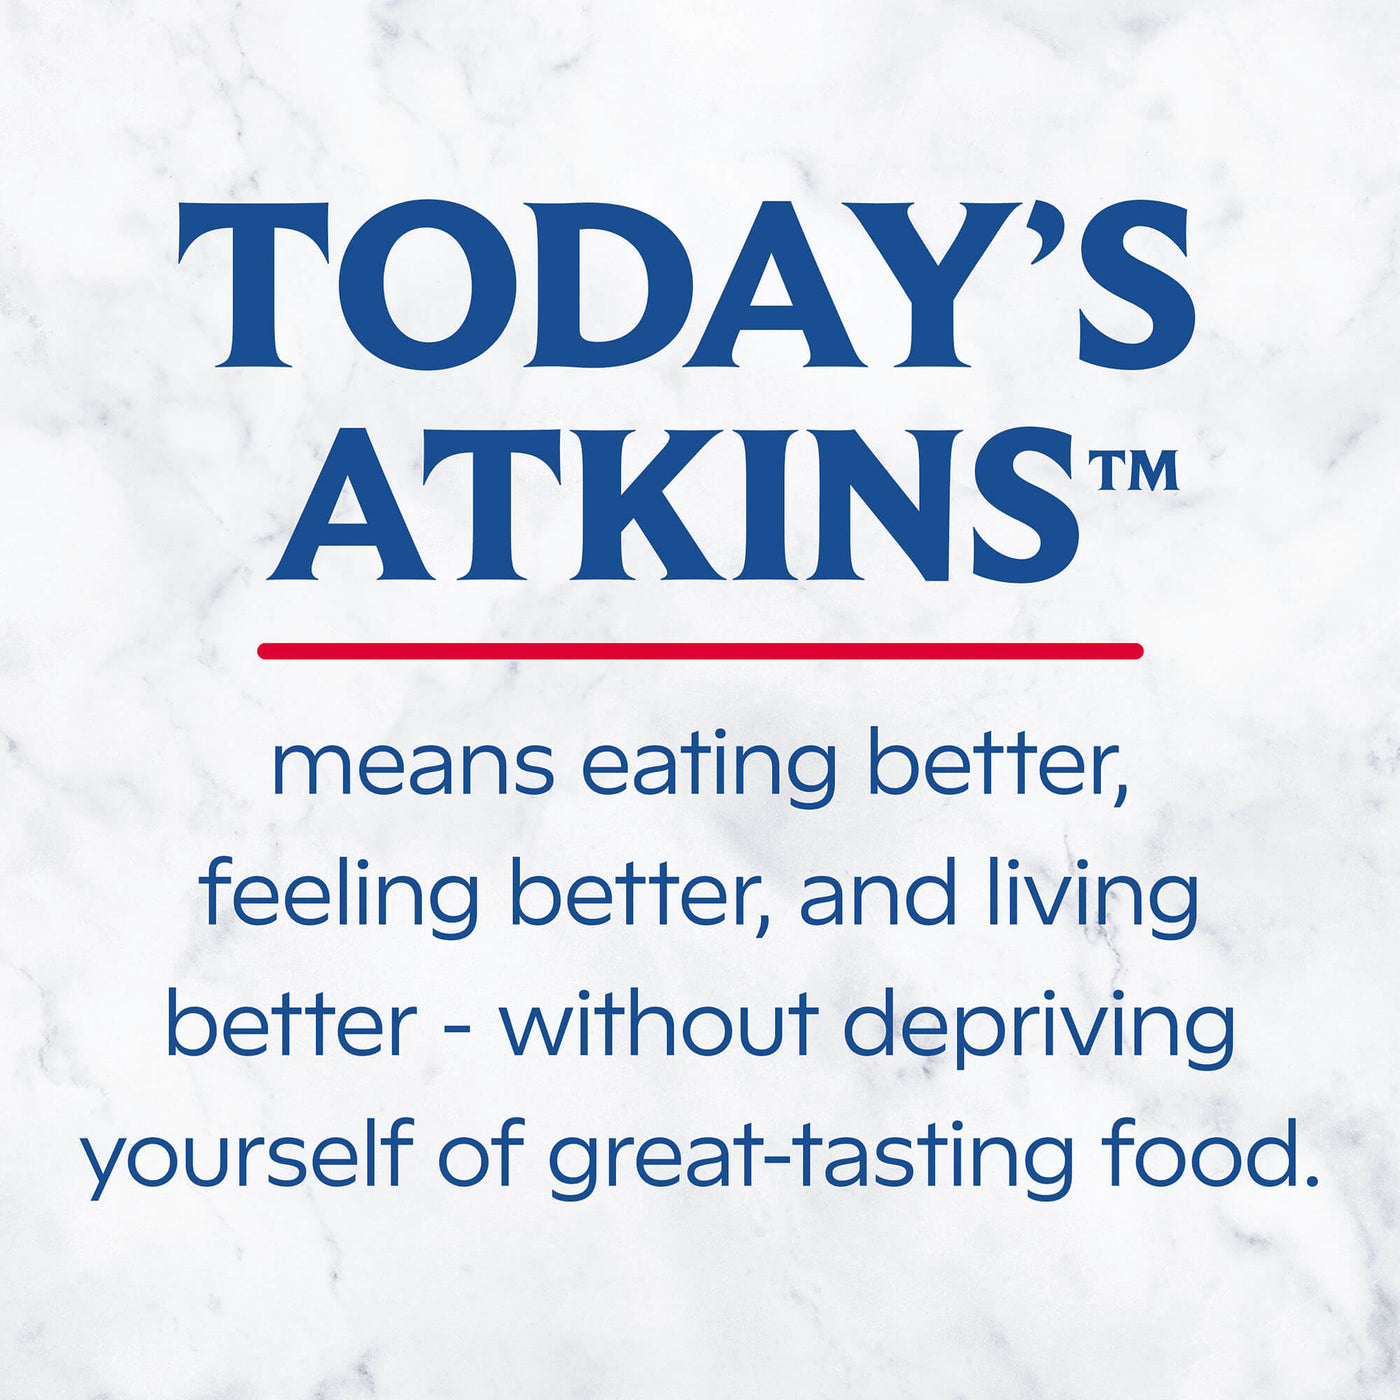 Chocolate Crème Wafer Crisps-Today's Atkins means eating better, feeling better, and living better-without depriving yourdelf of great-tasting food.